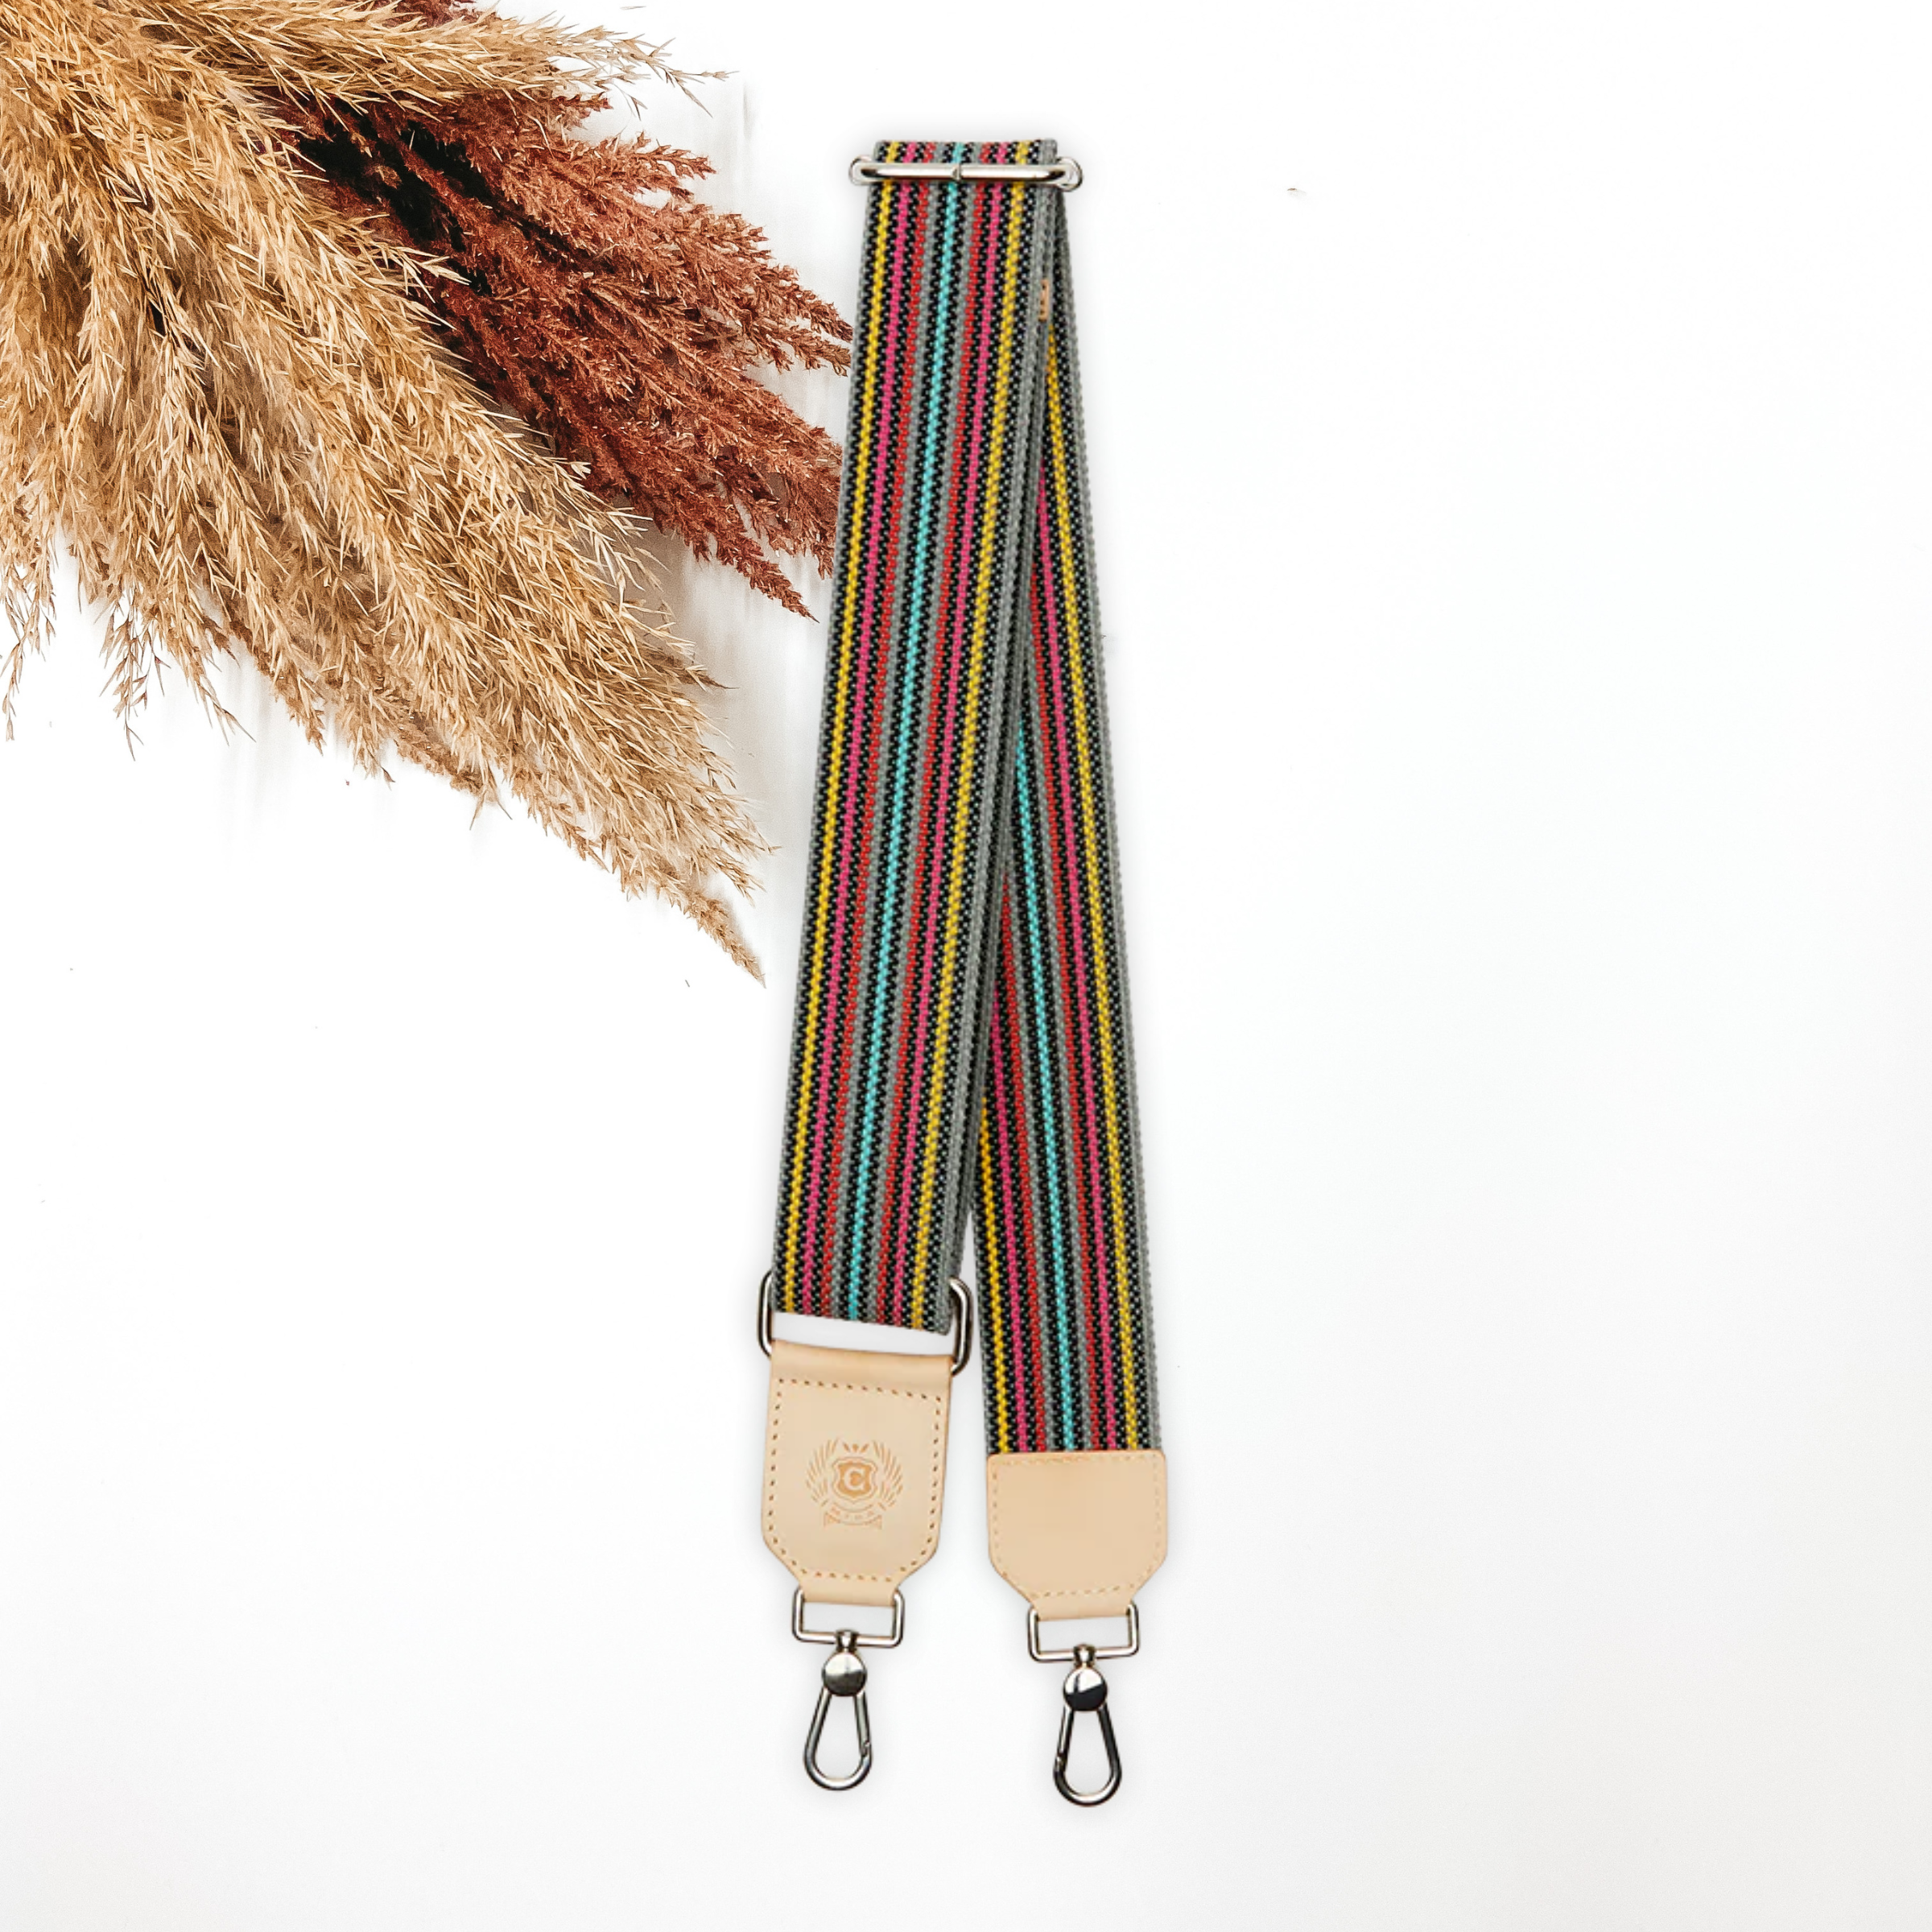 A woven multicolored striped purse strap that has a main color of grey. This purse strap is pictured on a white background with tan and brown pompous grass in the top left corner.